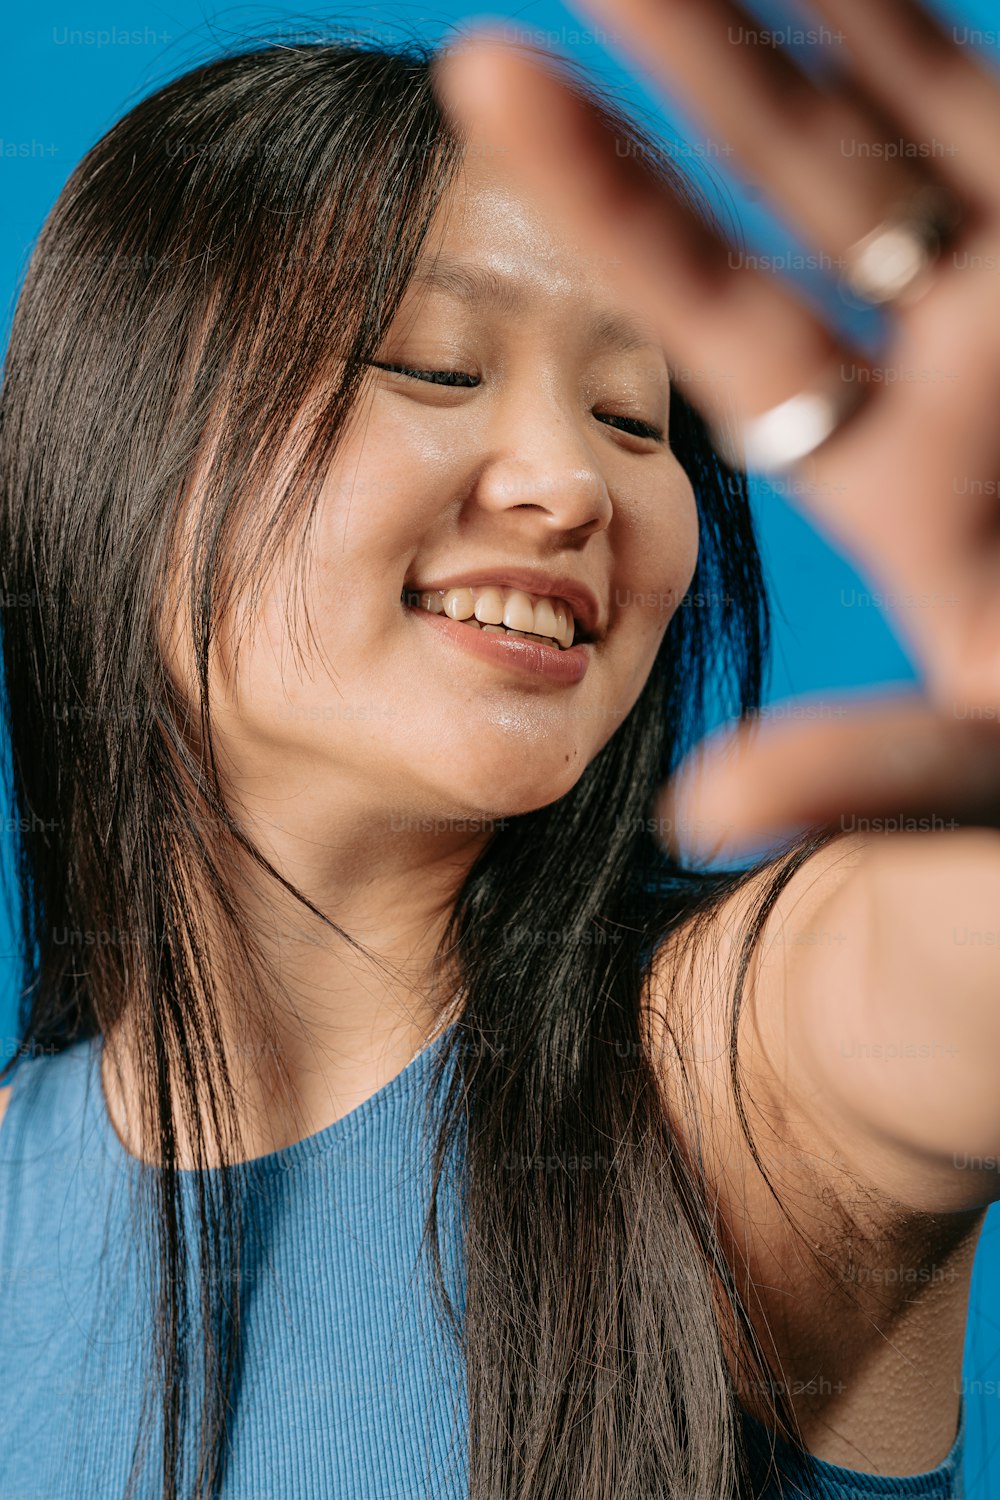 a woman smiling and holding a cell phone to her ear